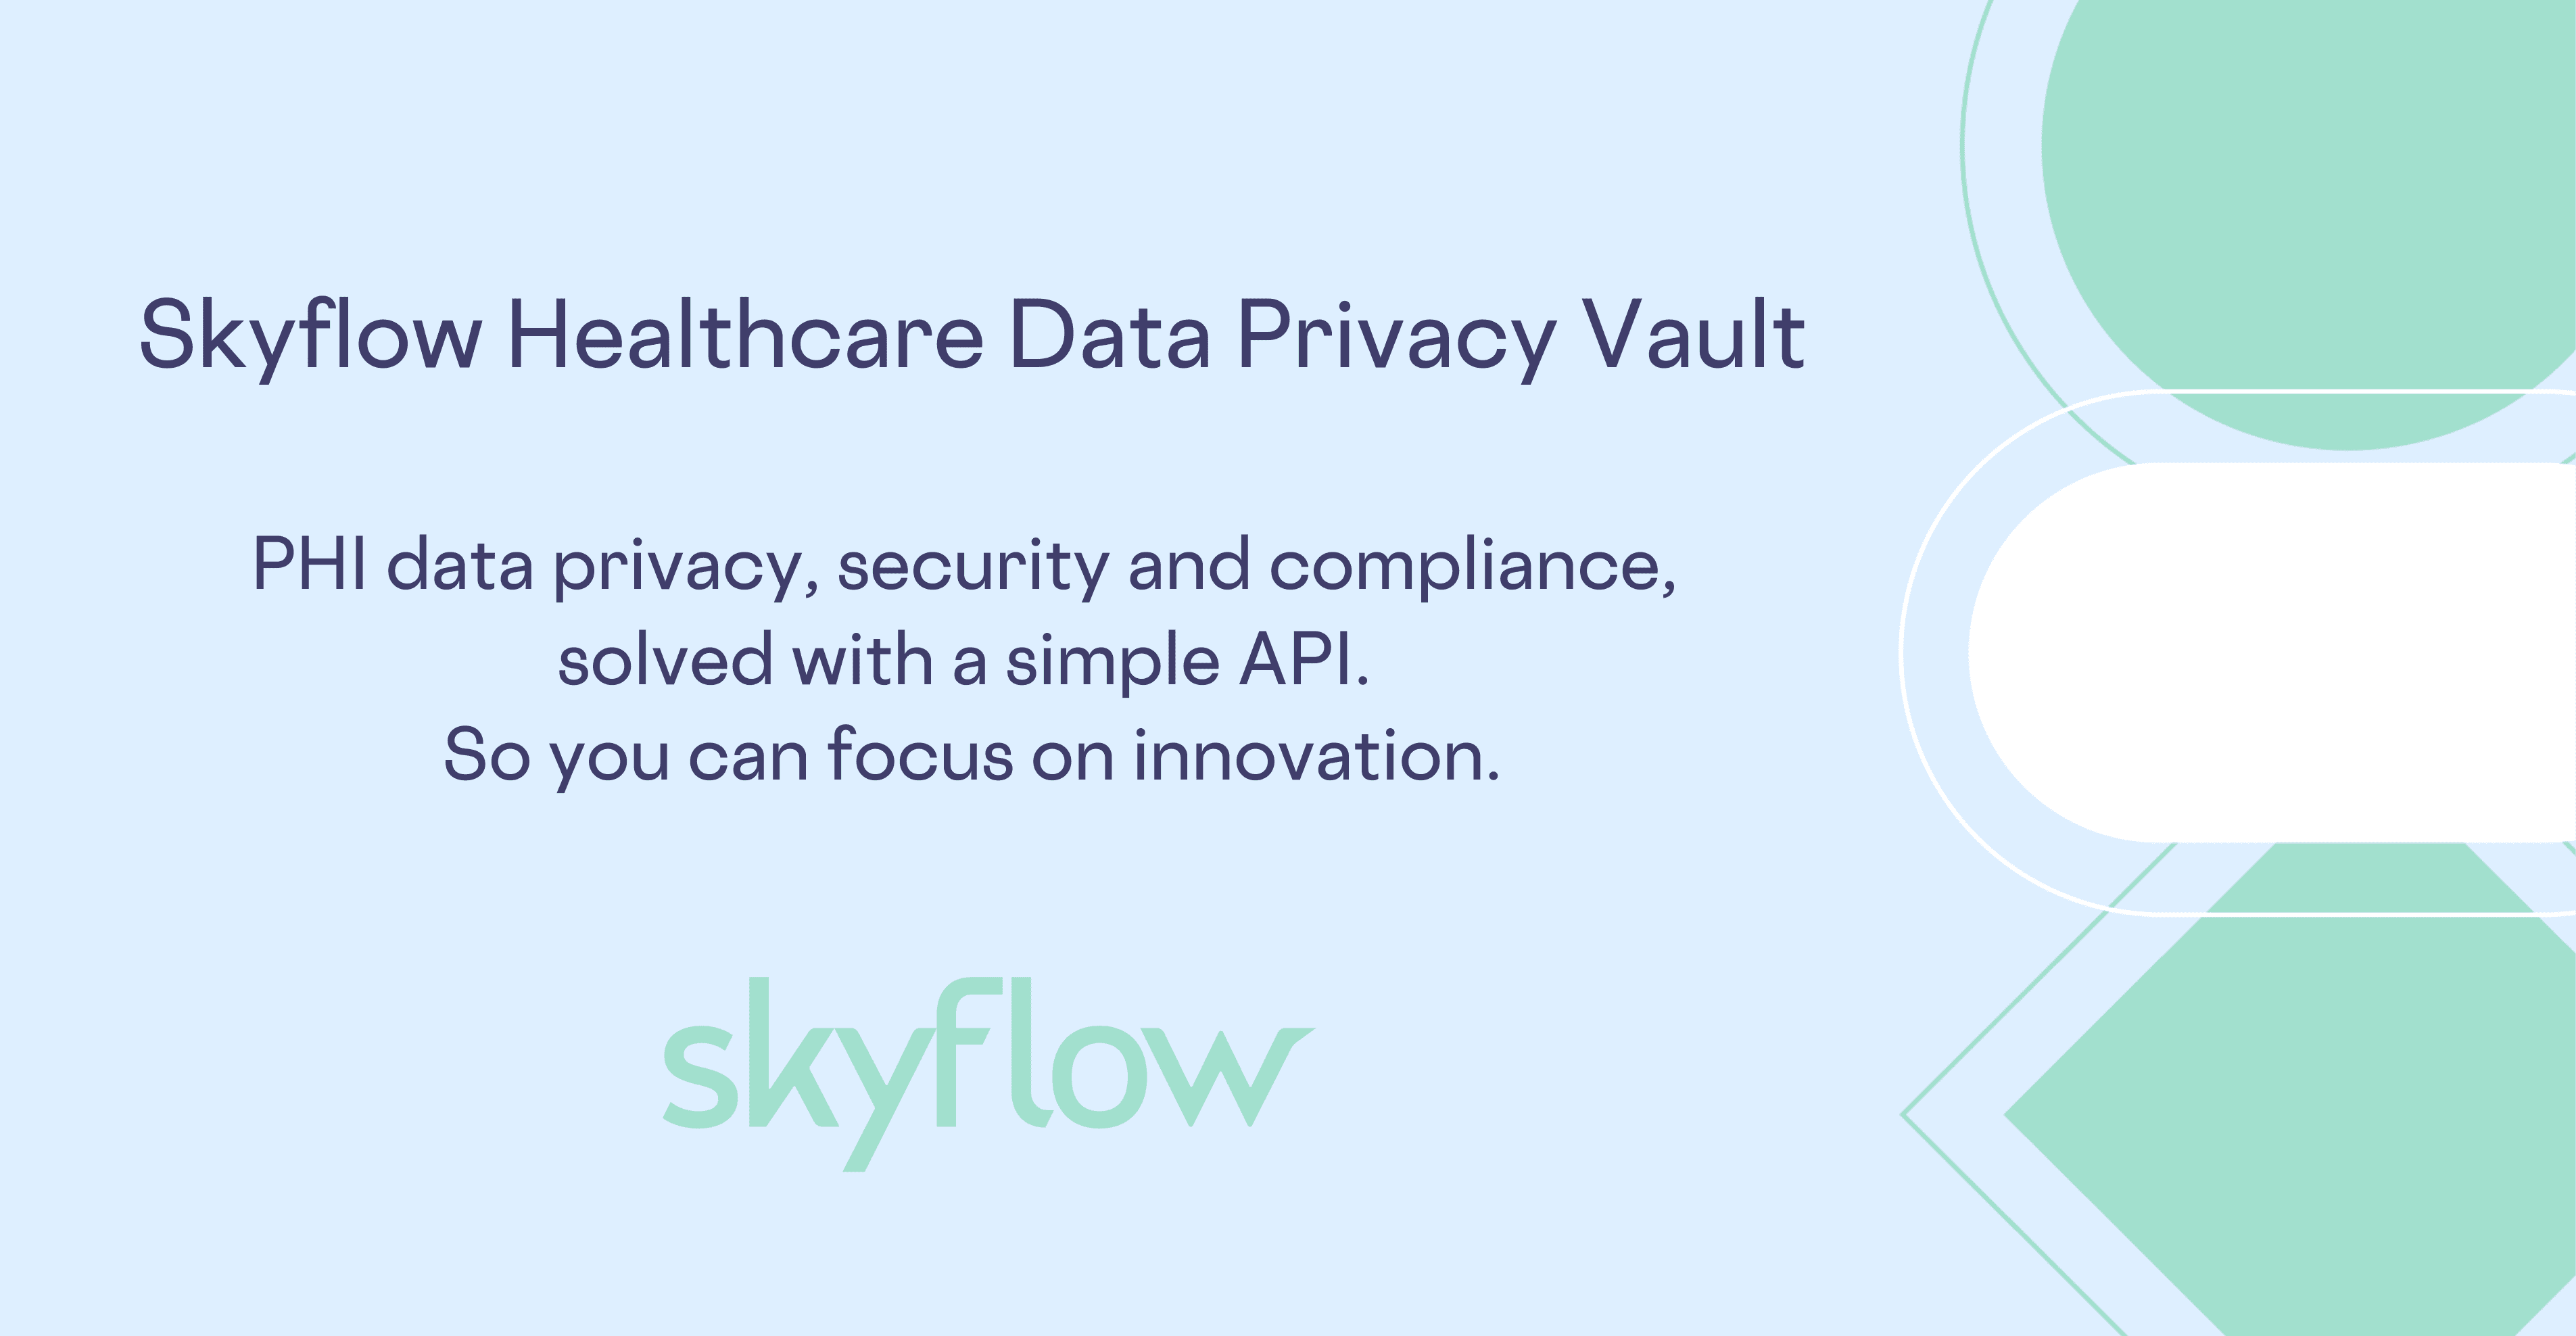 Image for Skyflow's Healthcare Data Privacy Vault